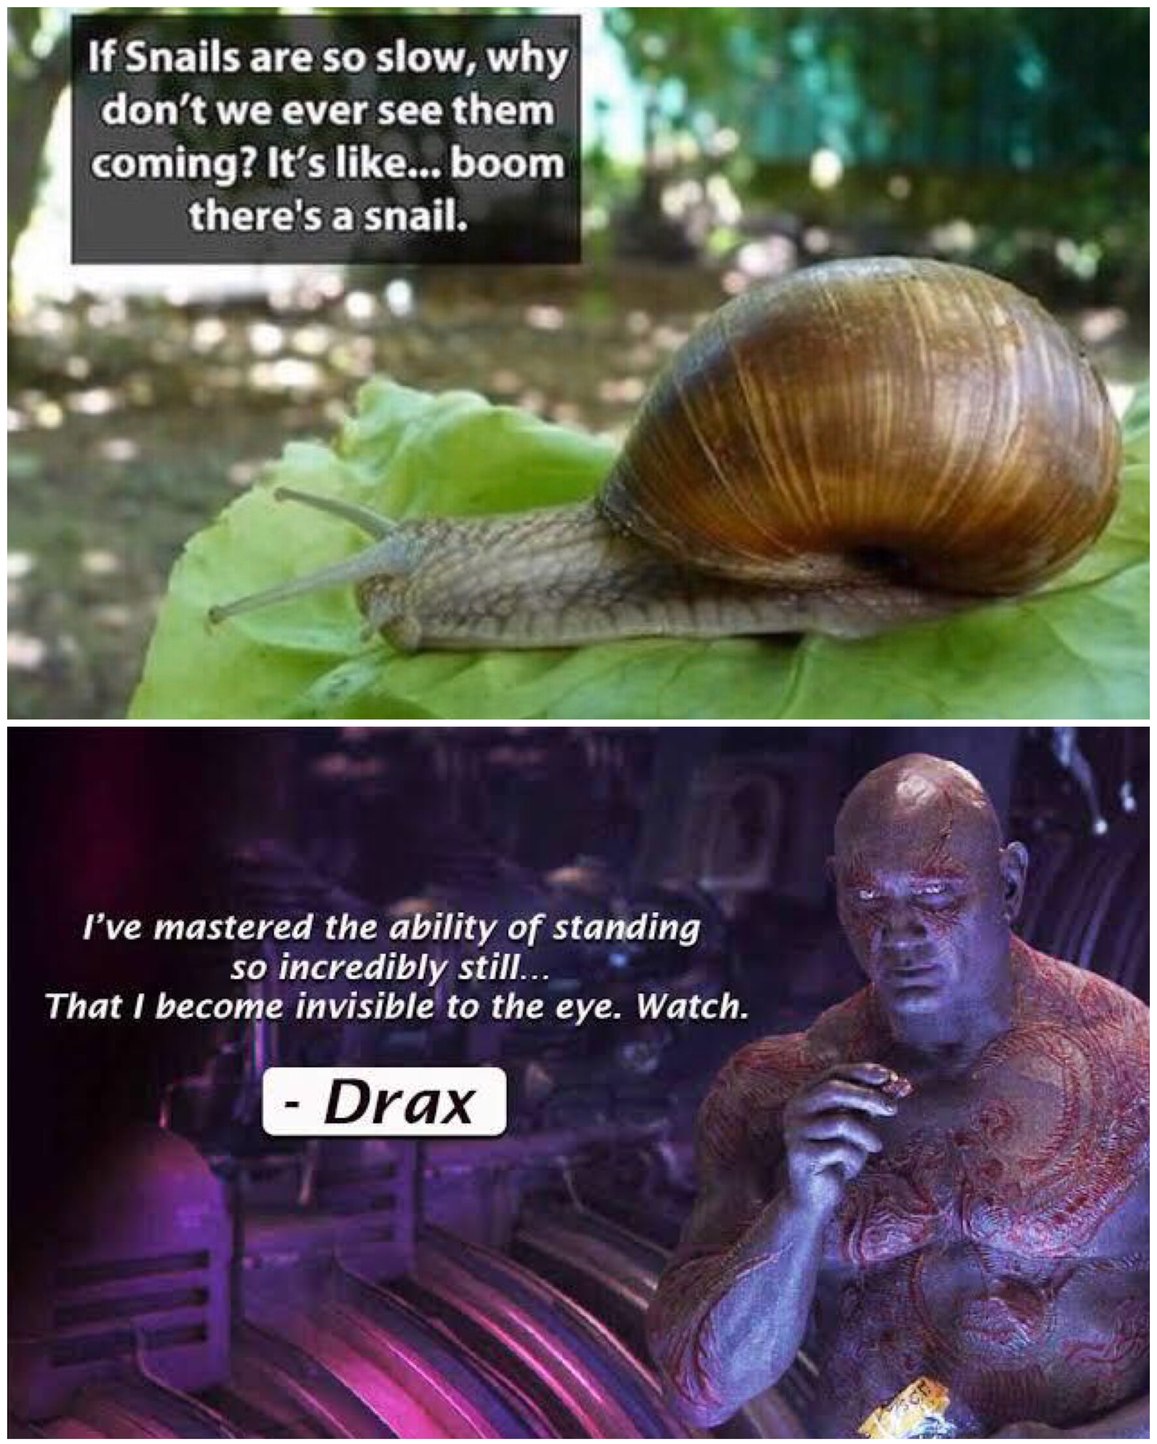 This is my answer to the snail meme I saw in gallery earlier